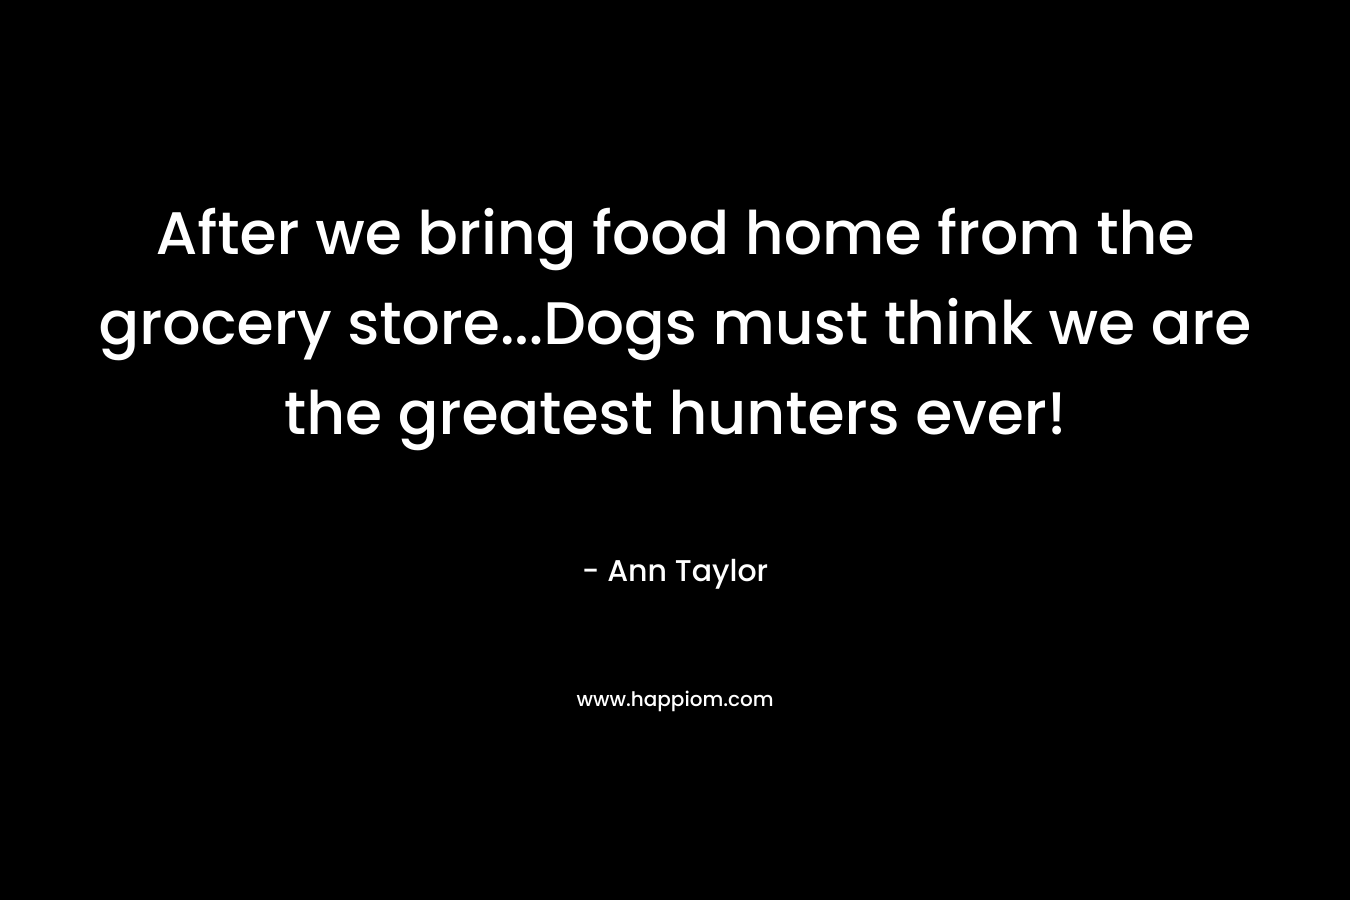 After we bring food home from the grocery store...Dogs must think we are the greatest hunters ever!